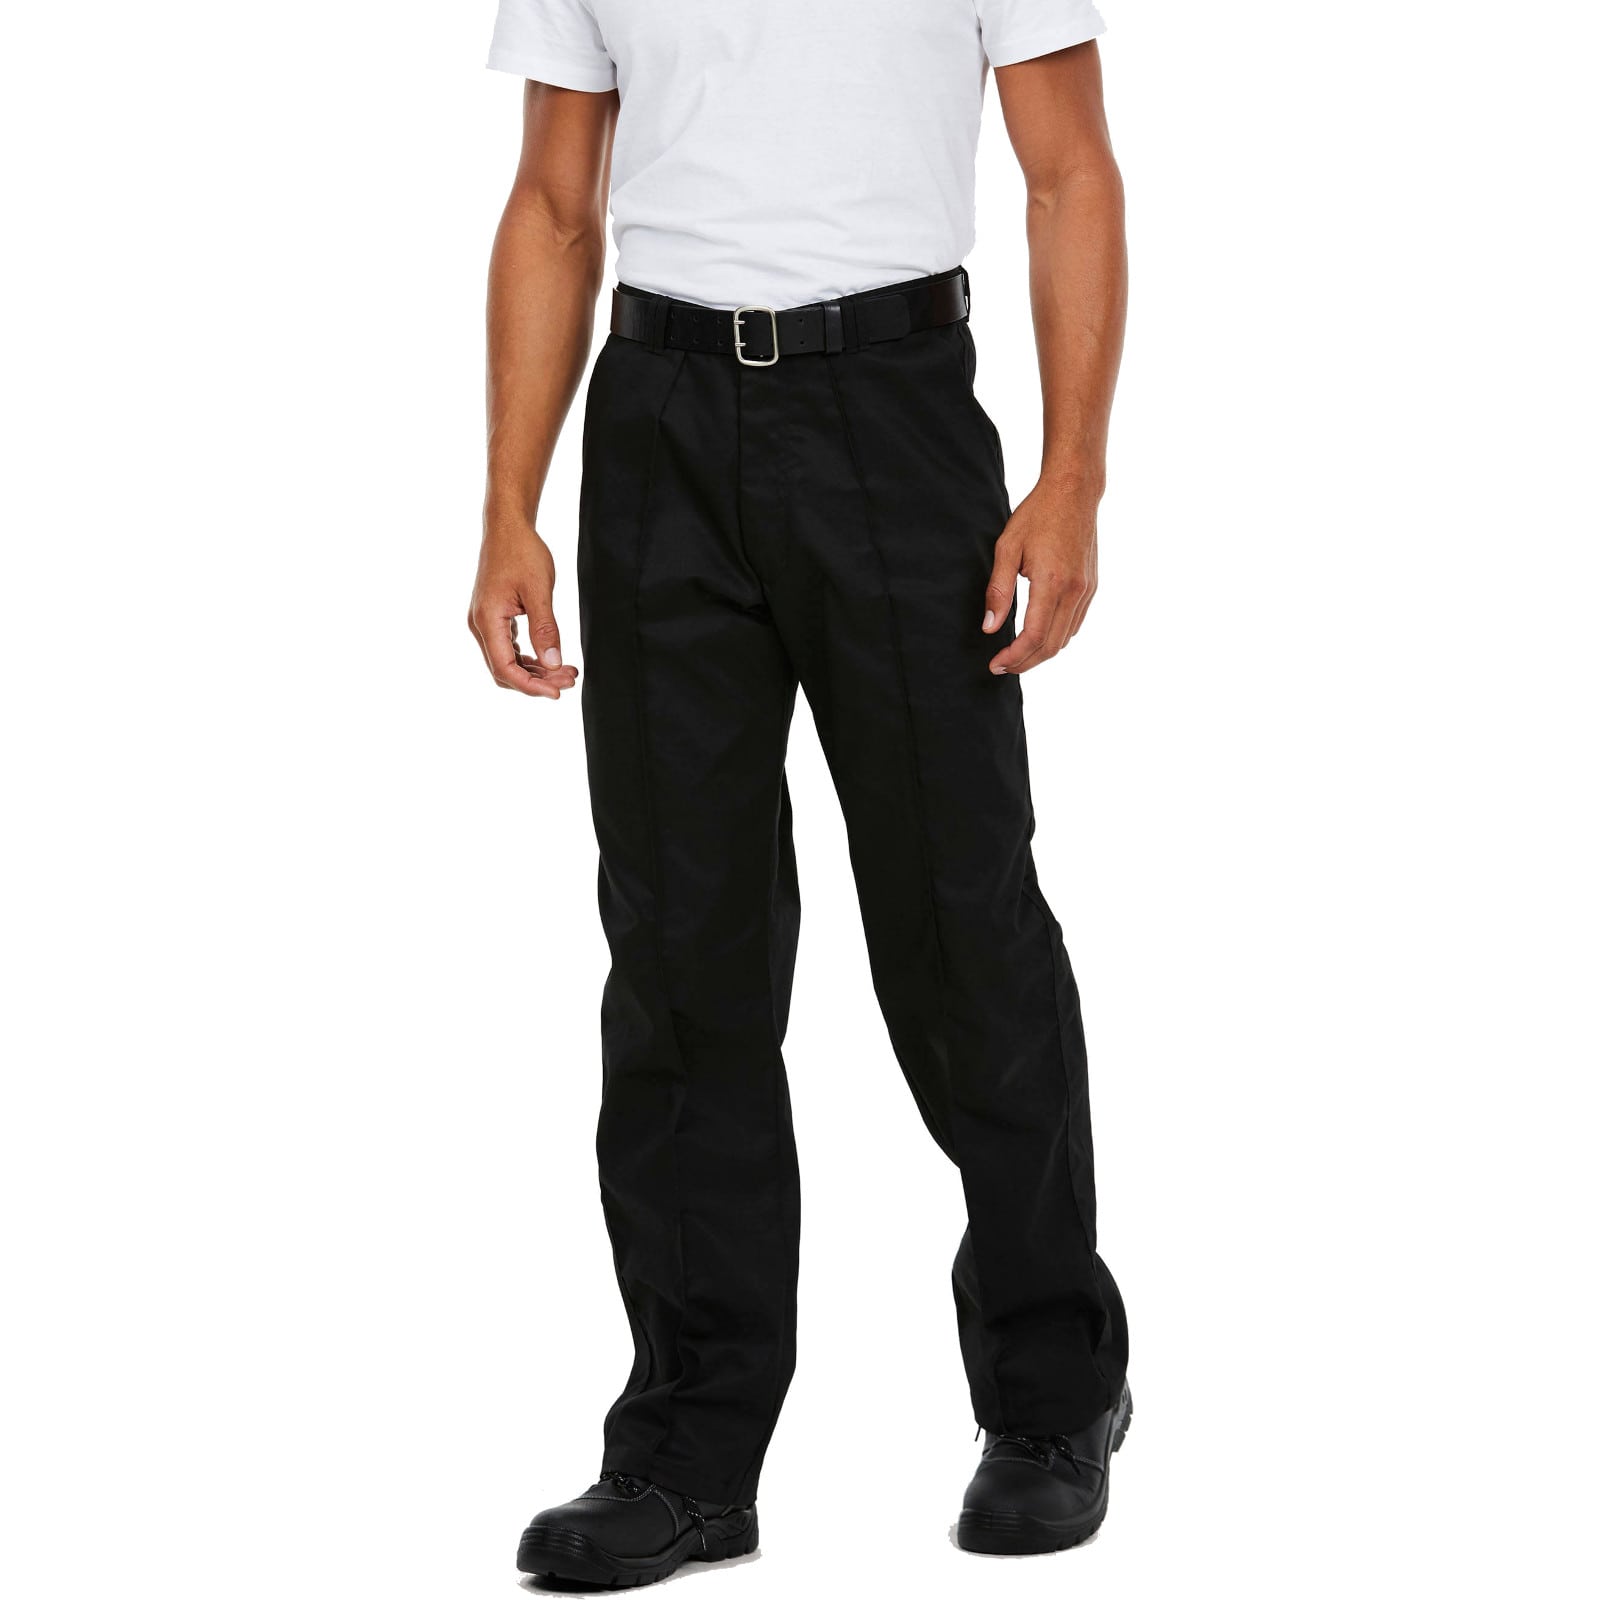 Basic Work Trousers - MG Safety